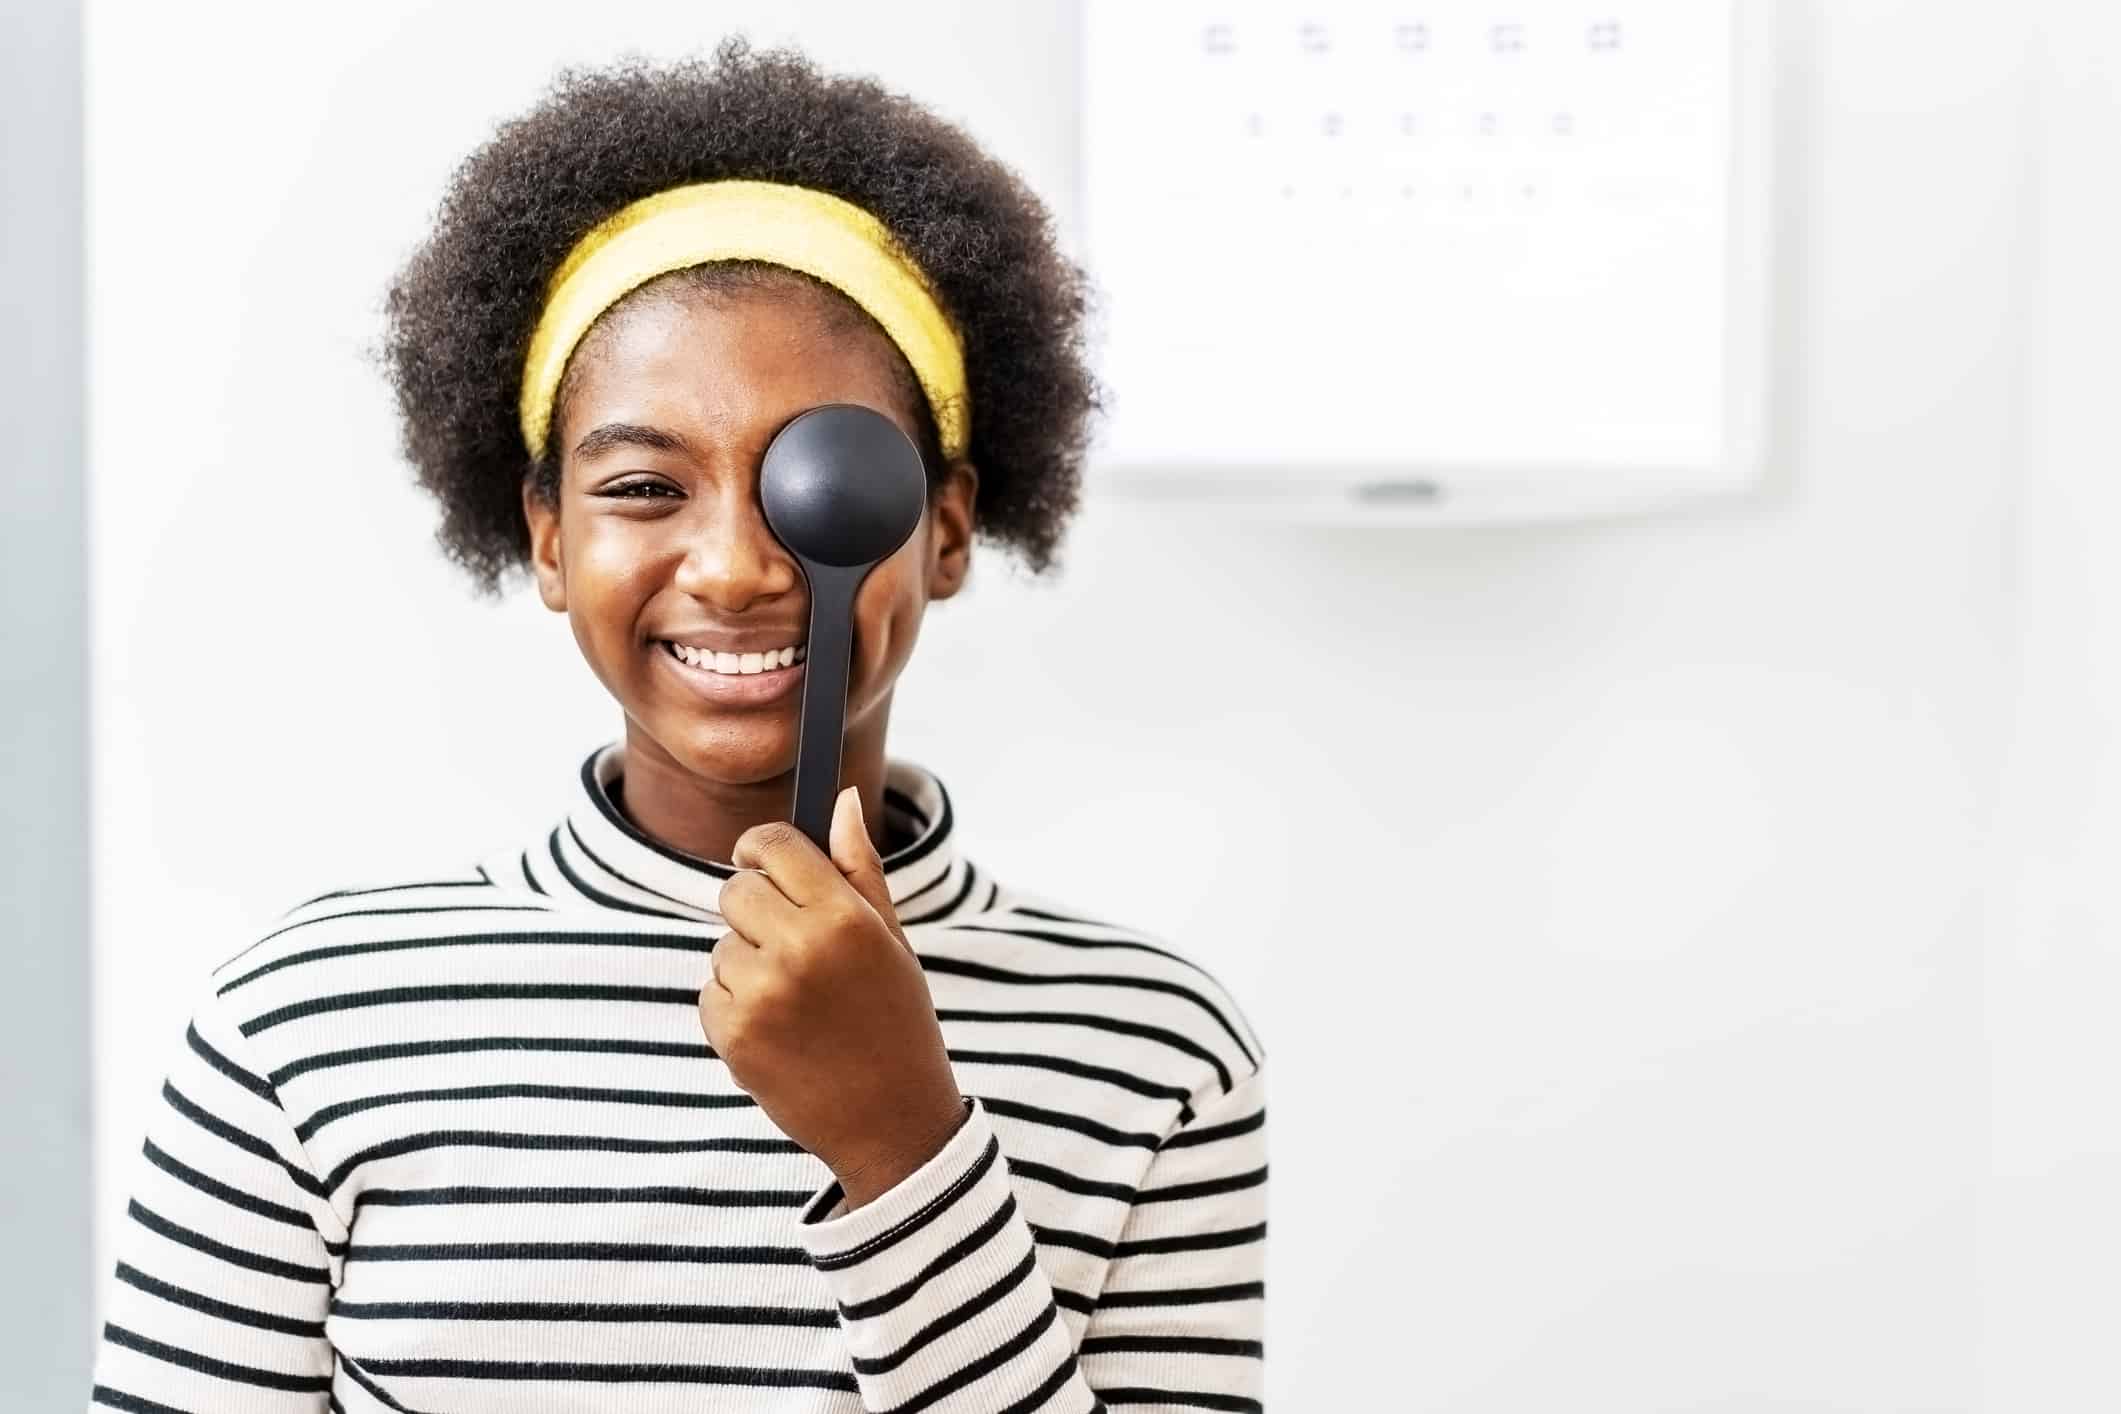 Smiling young woman eye test in ophthalmological clinics, holding occluder and looking at chart